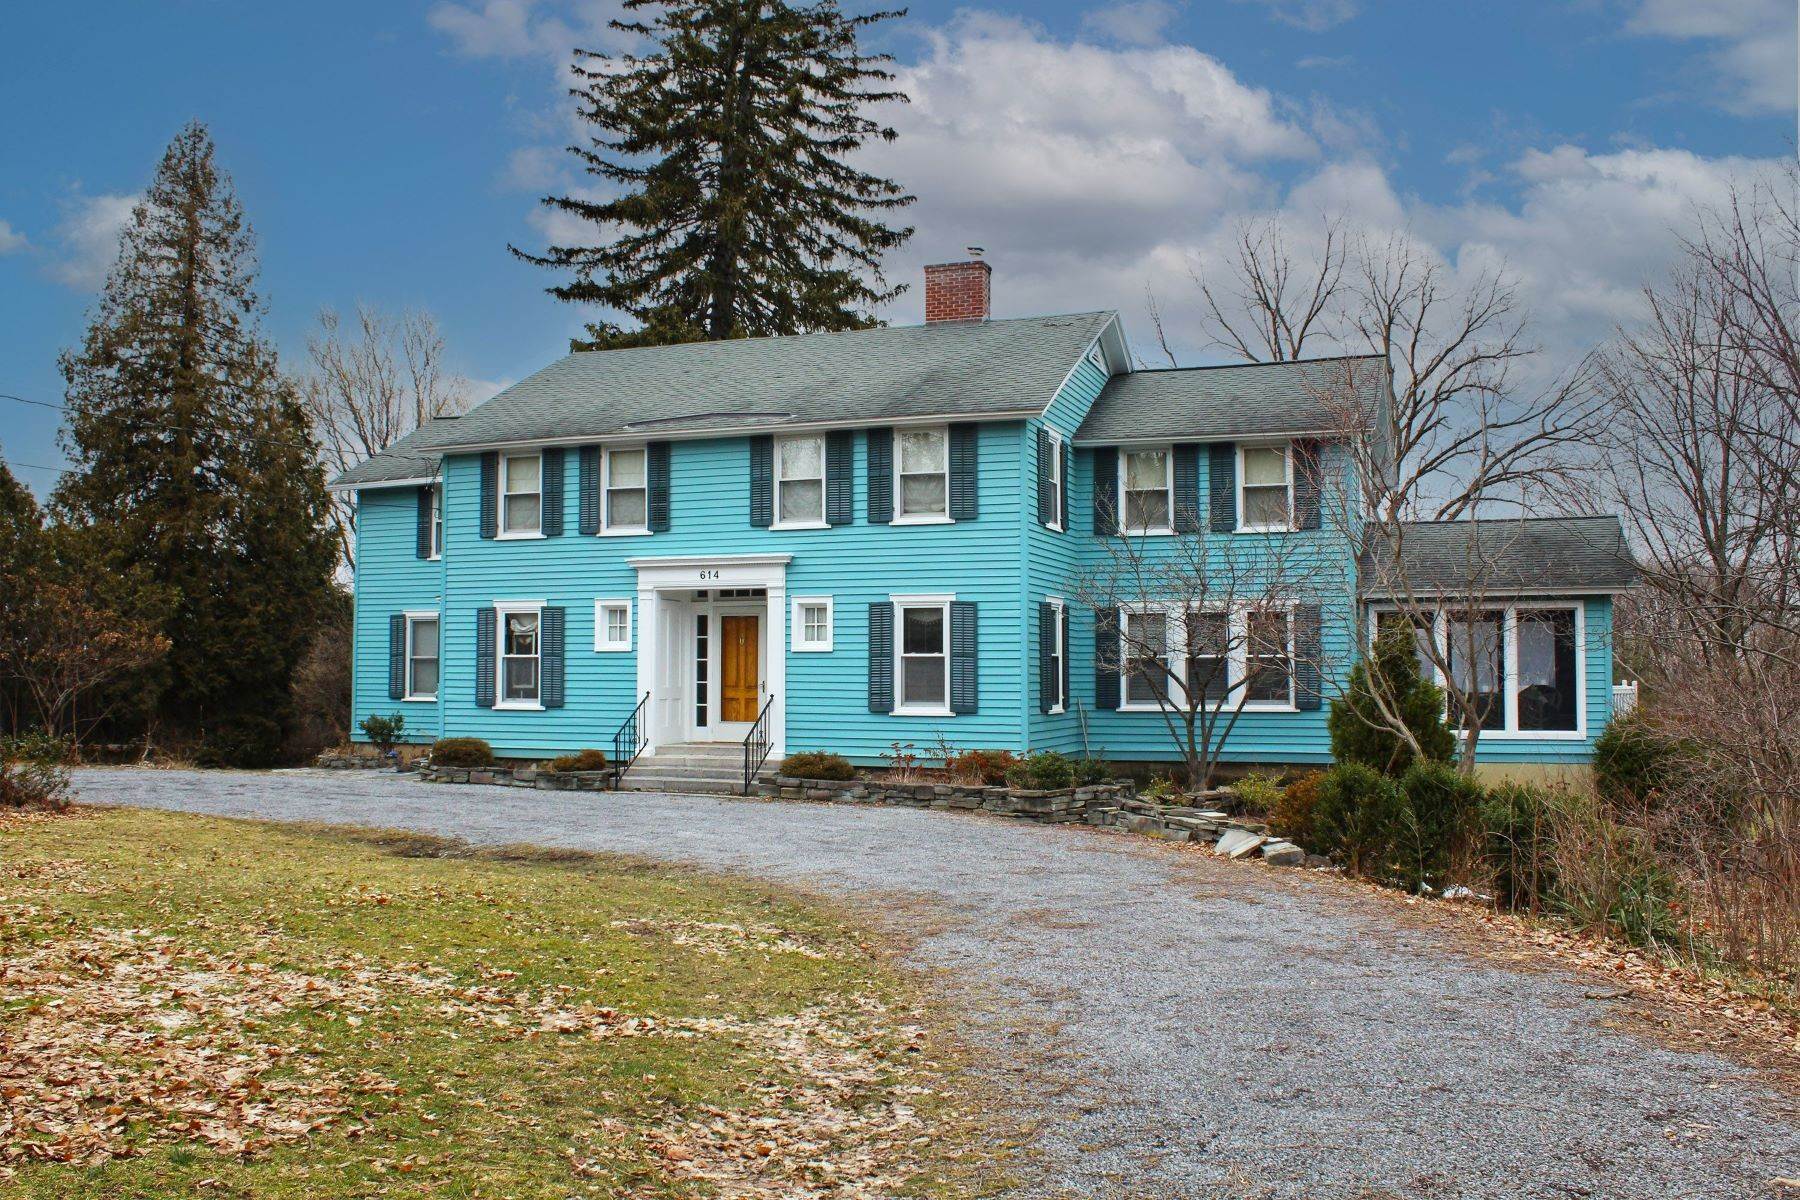 Bed and Breakfast Homes for Sale at Buena Vista House 614 West North Street Geneva, New York 14456 United States